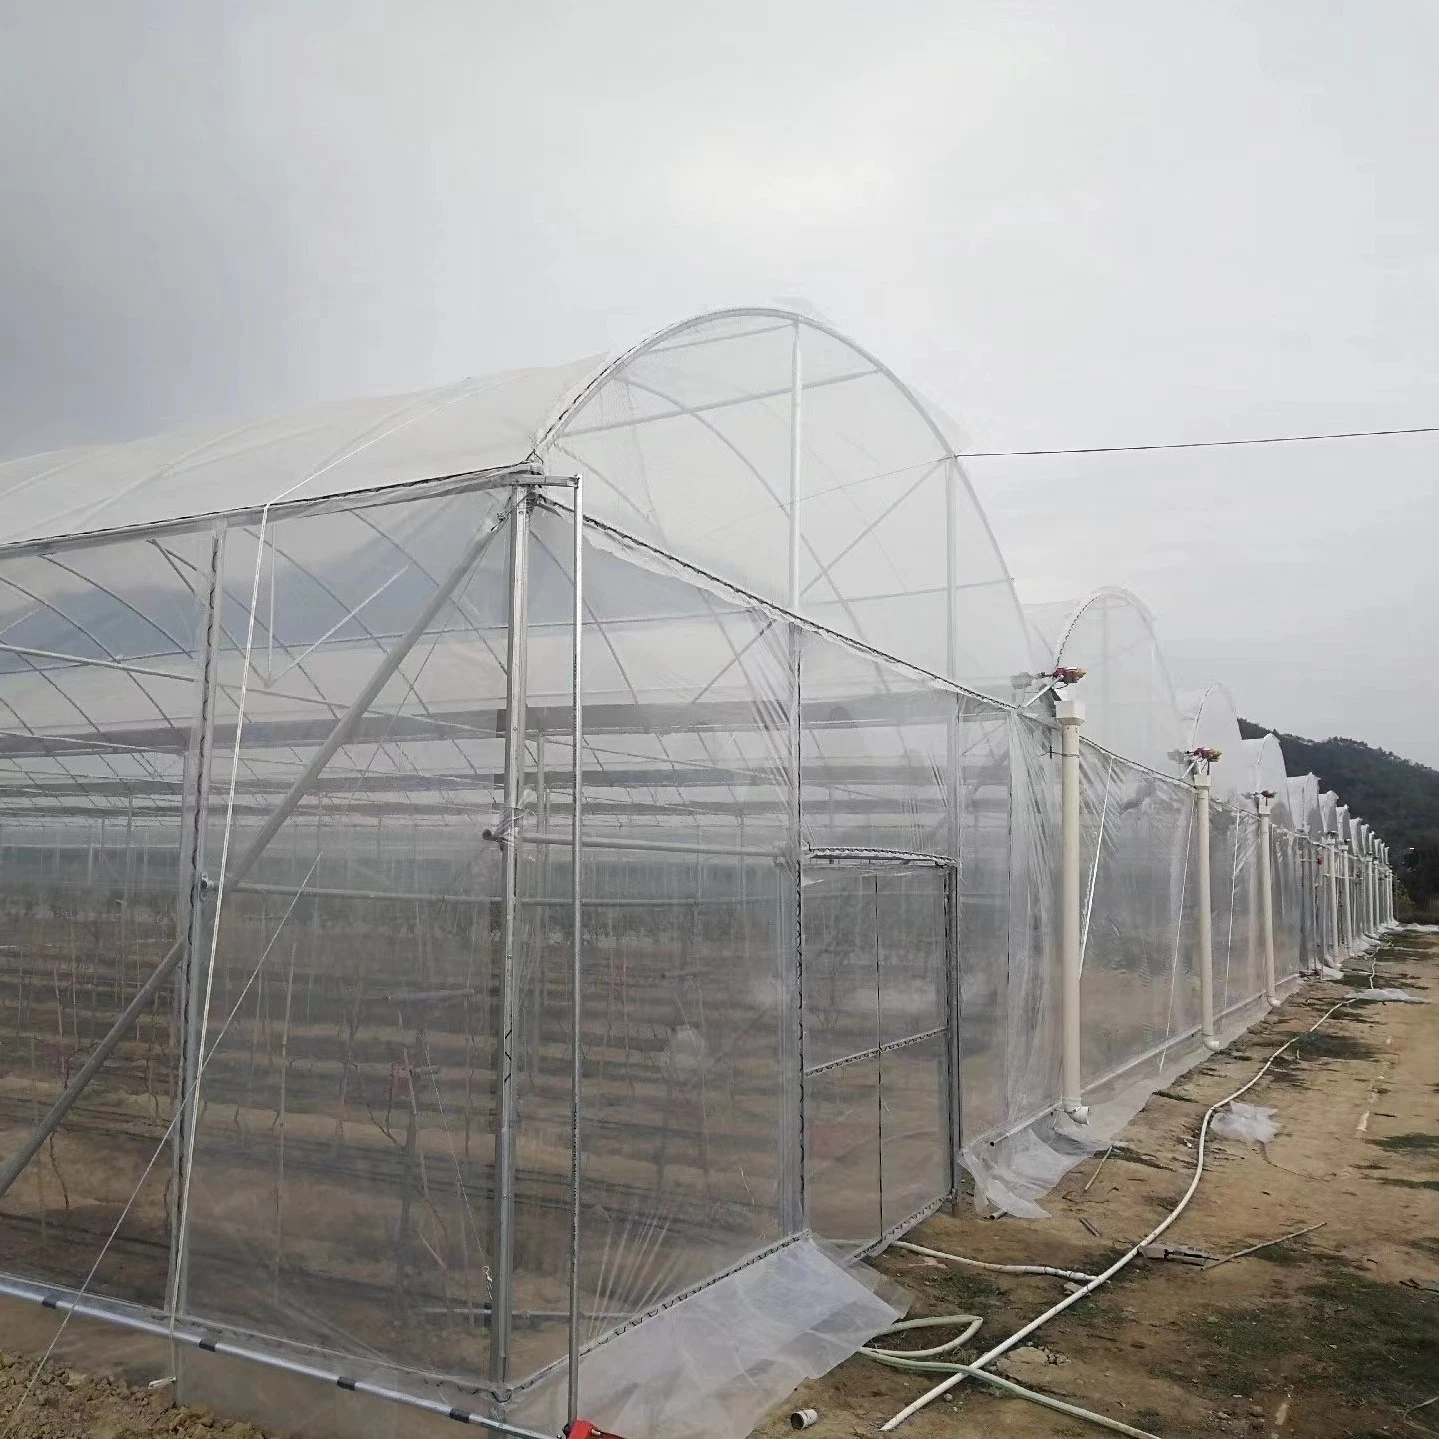 Premium Quality Sustainable Gardening UV Resistant Film Transparent for Greenhouse Roofing Agriculture Low Cost